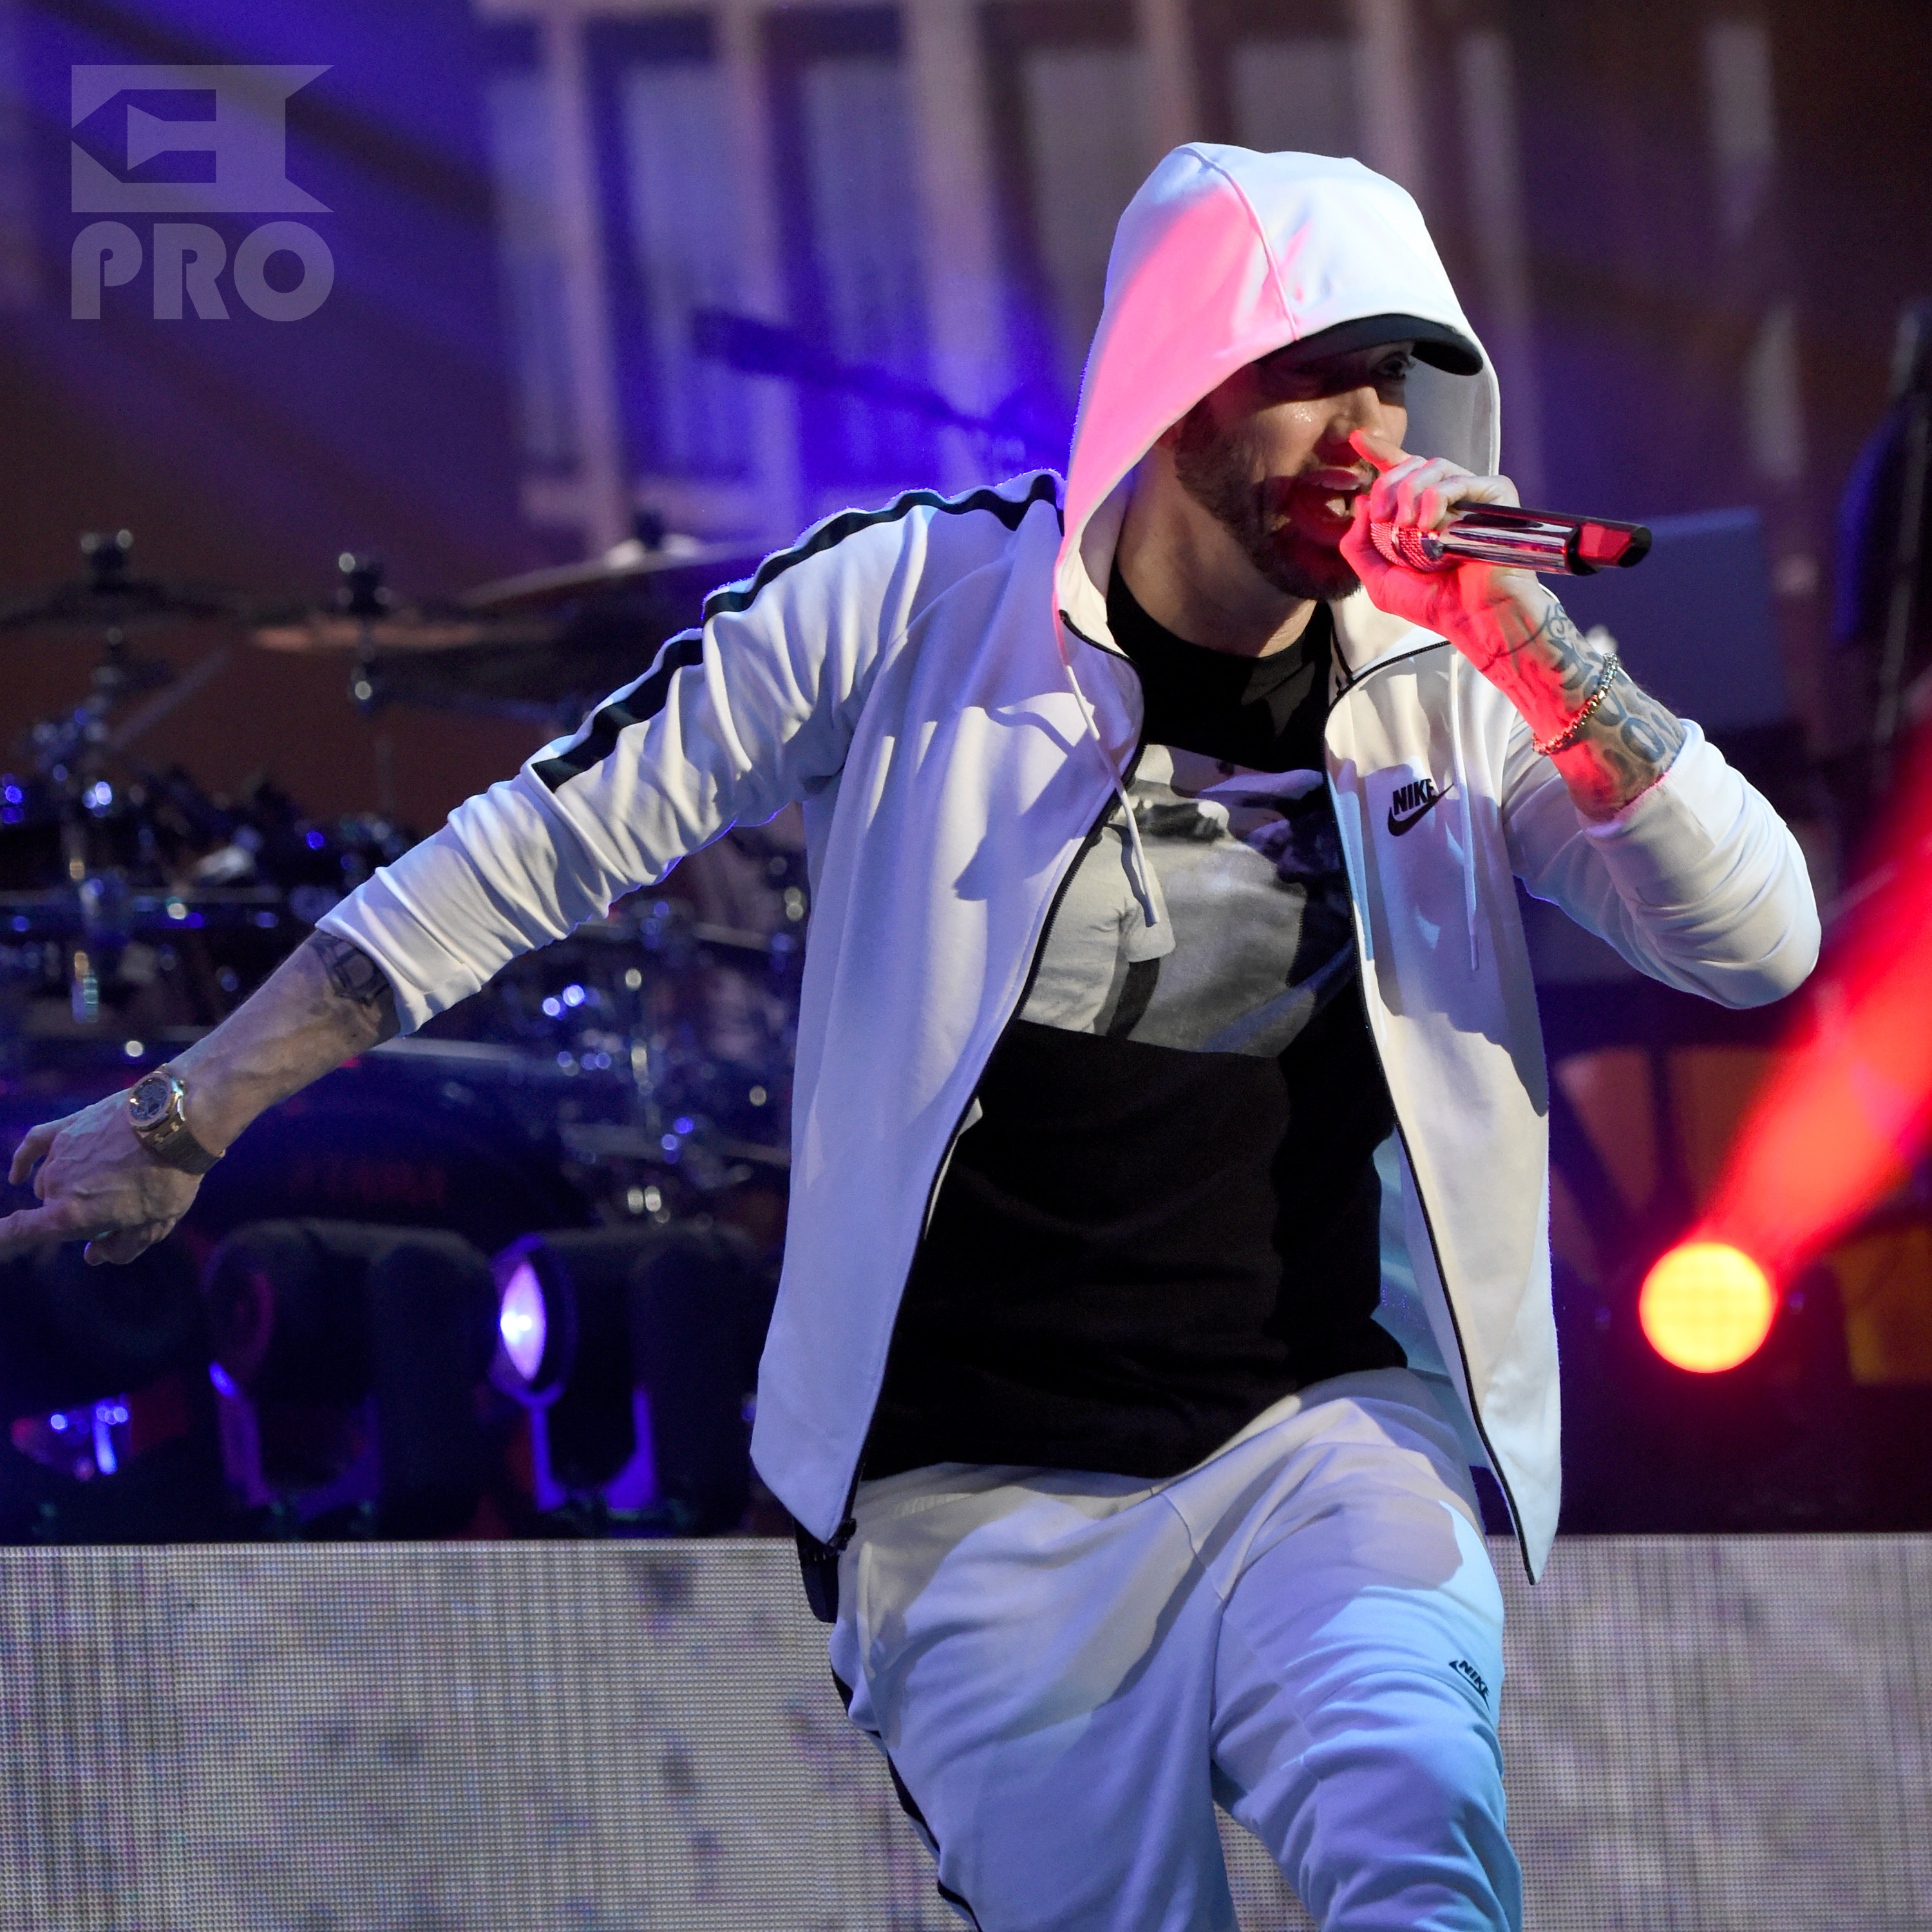 INDIO, CA - APRIL 15: Eminem performs onstage during the 2018 Coachella Valley Music and Arts Festival Weekend 1 at the Empire Polo Field on April 15, 2018 in Indio, California. (Photo by Kevin Mazur/Getty Images for Coachella)